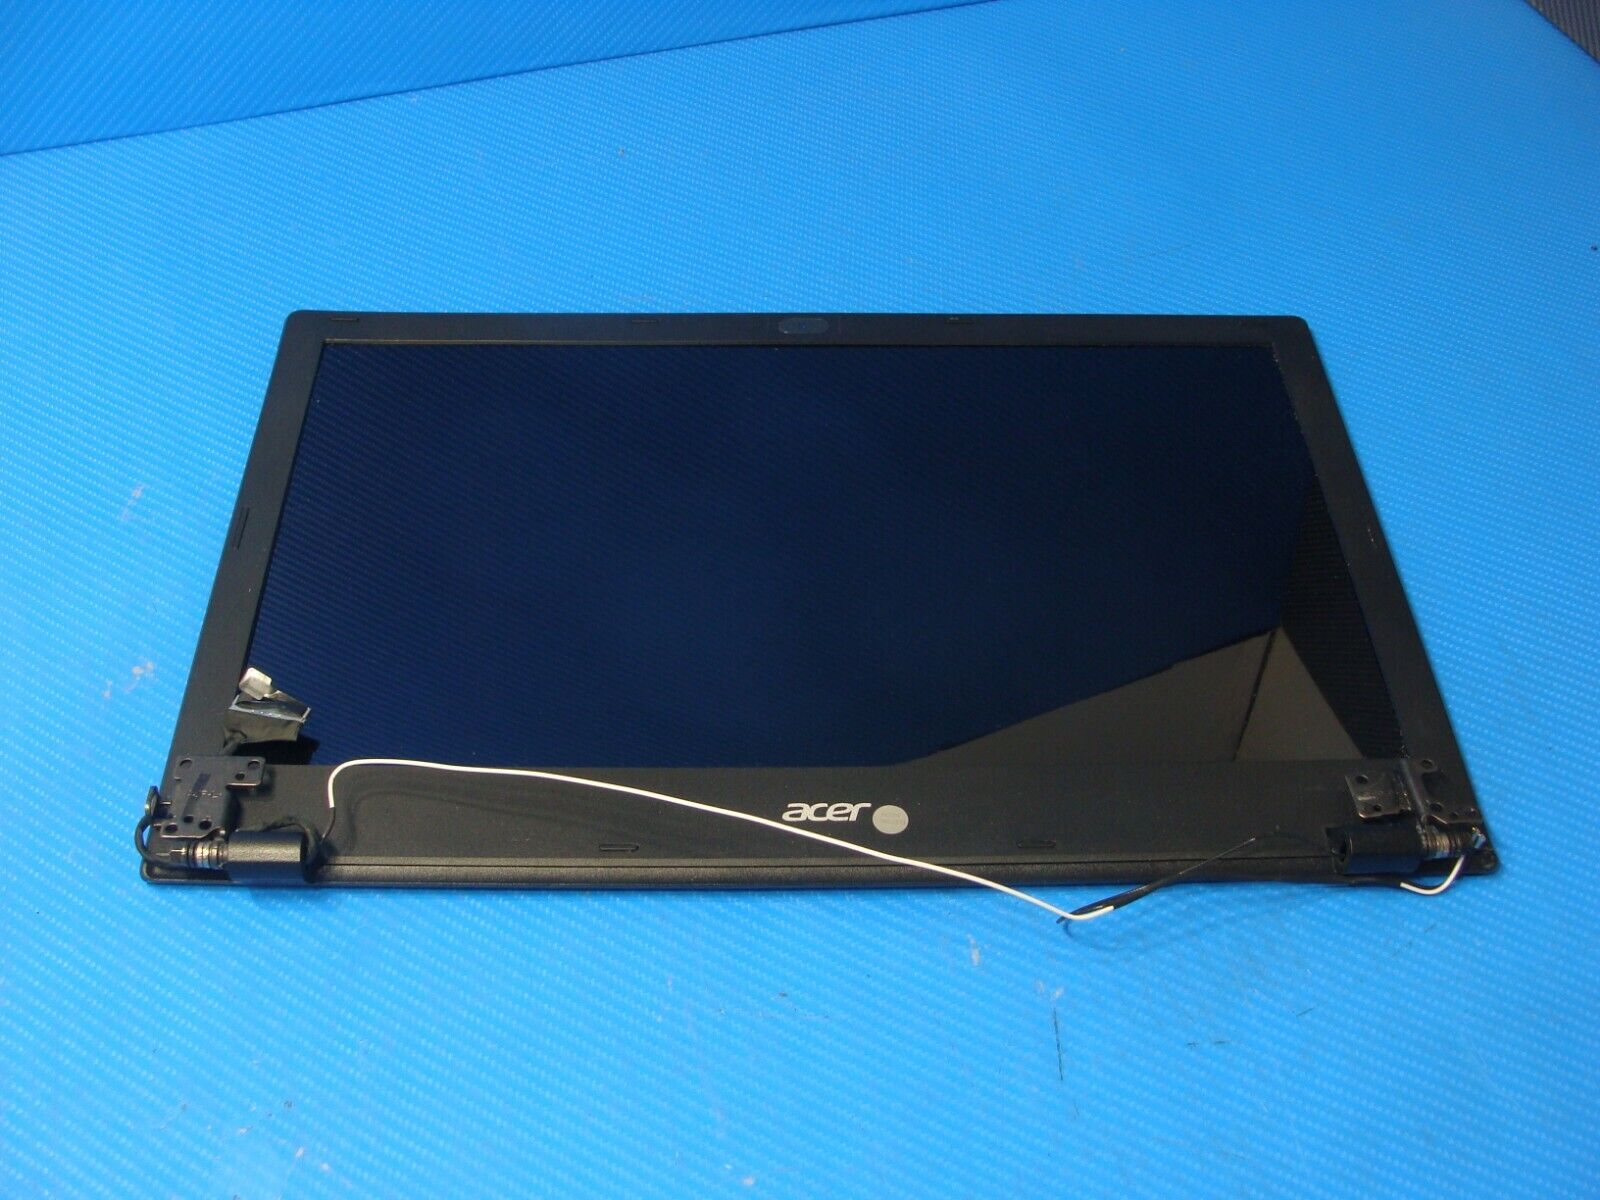 Acer Aspire F5-571T-569T 15.6